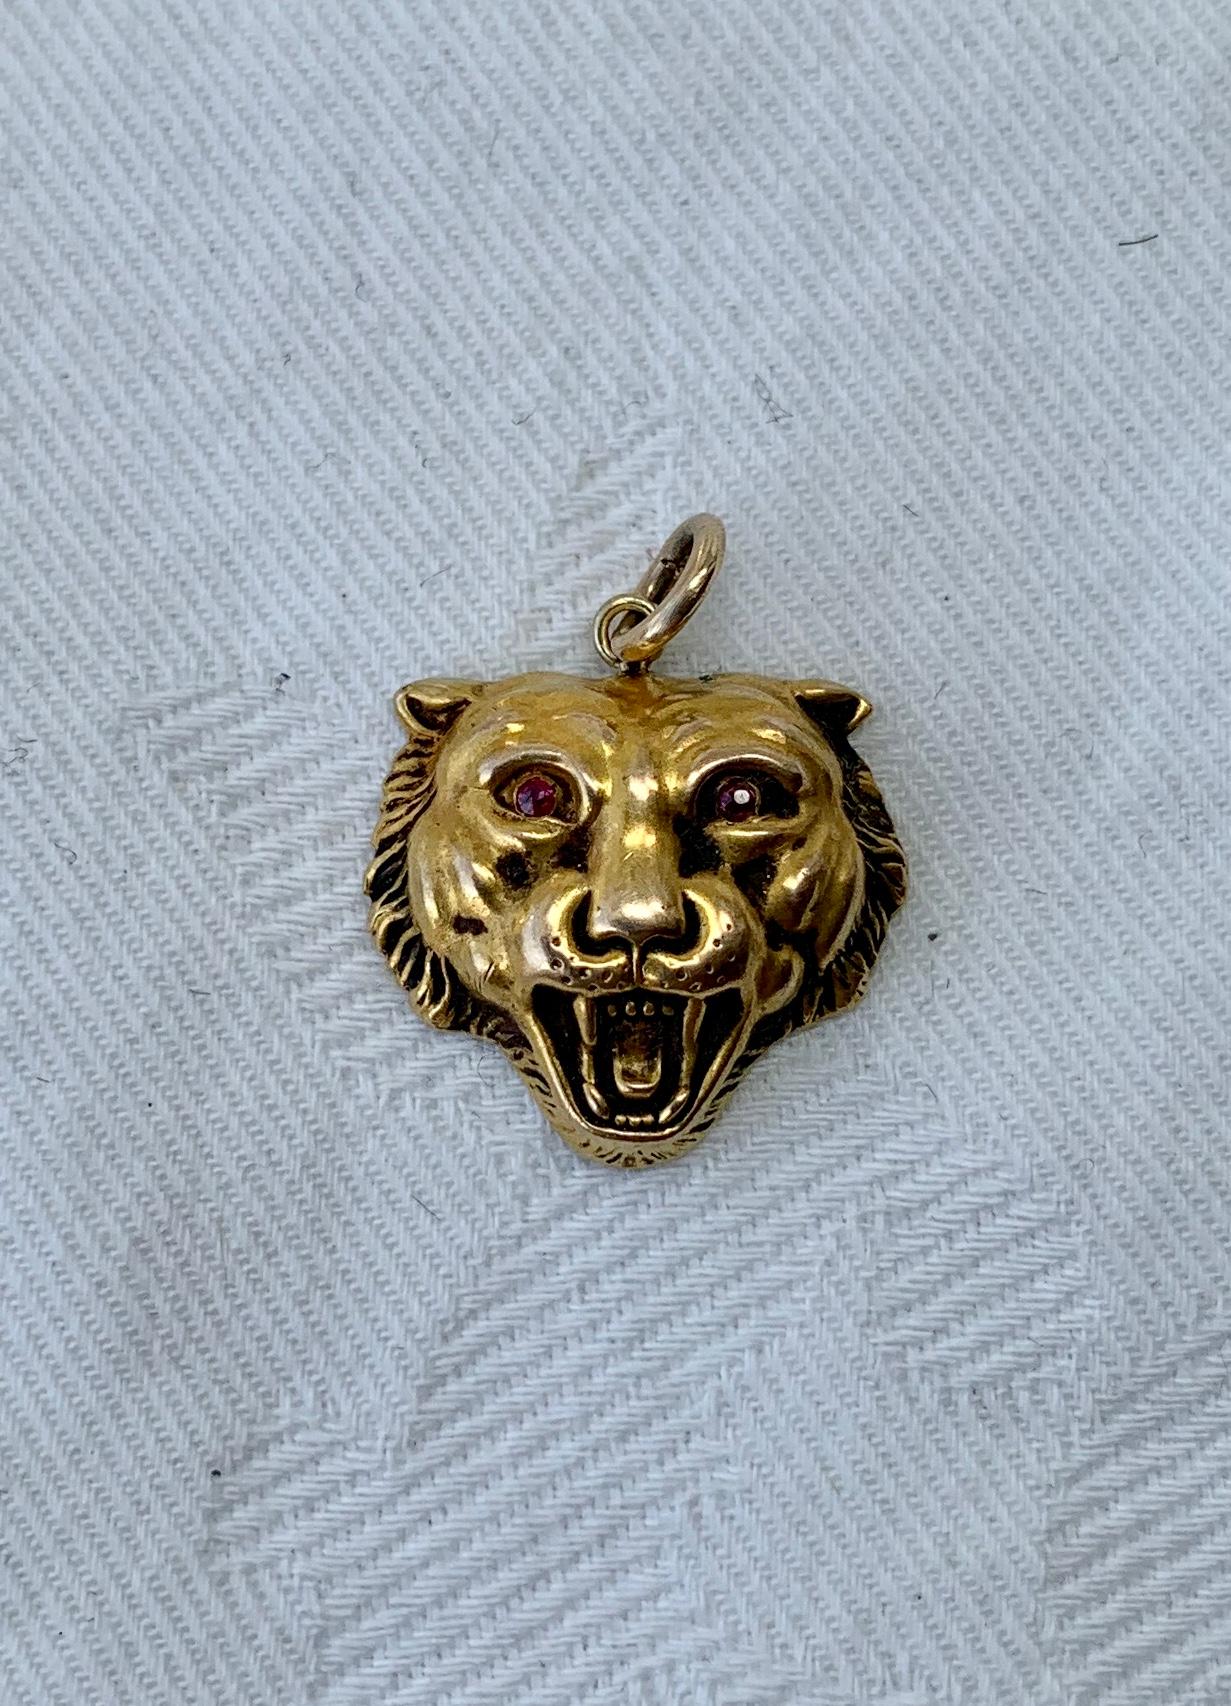 A wonderful antique Belle Epoque, Victorian pendant with a beautifully modeled lion, leopard or panther in 14 Karat Gold with two Ruby eyes.  We love our panther, lion, cat jewelry and this one has such stunning design.   The repousse raised and